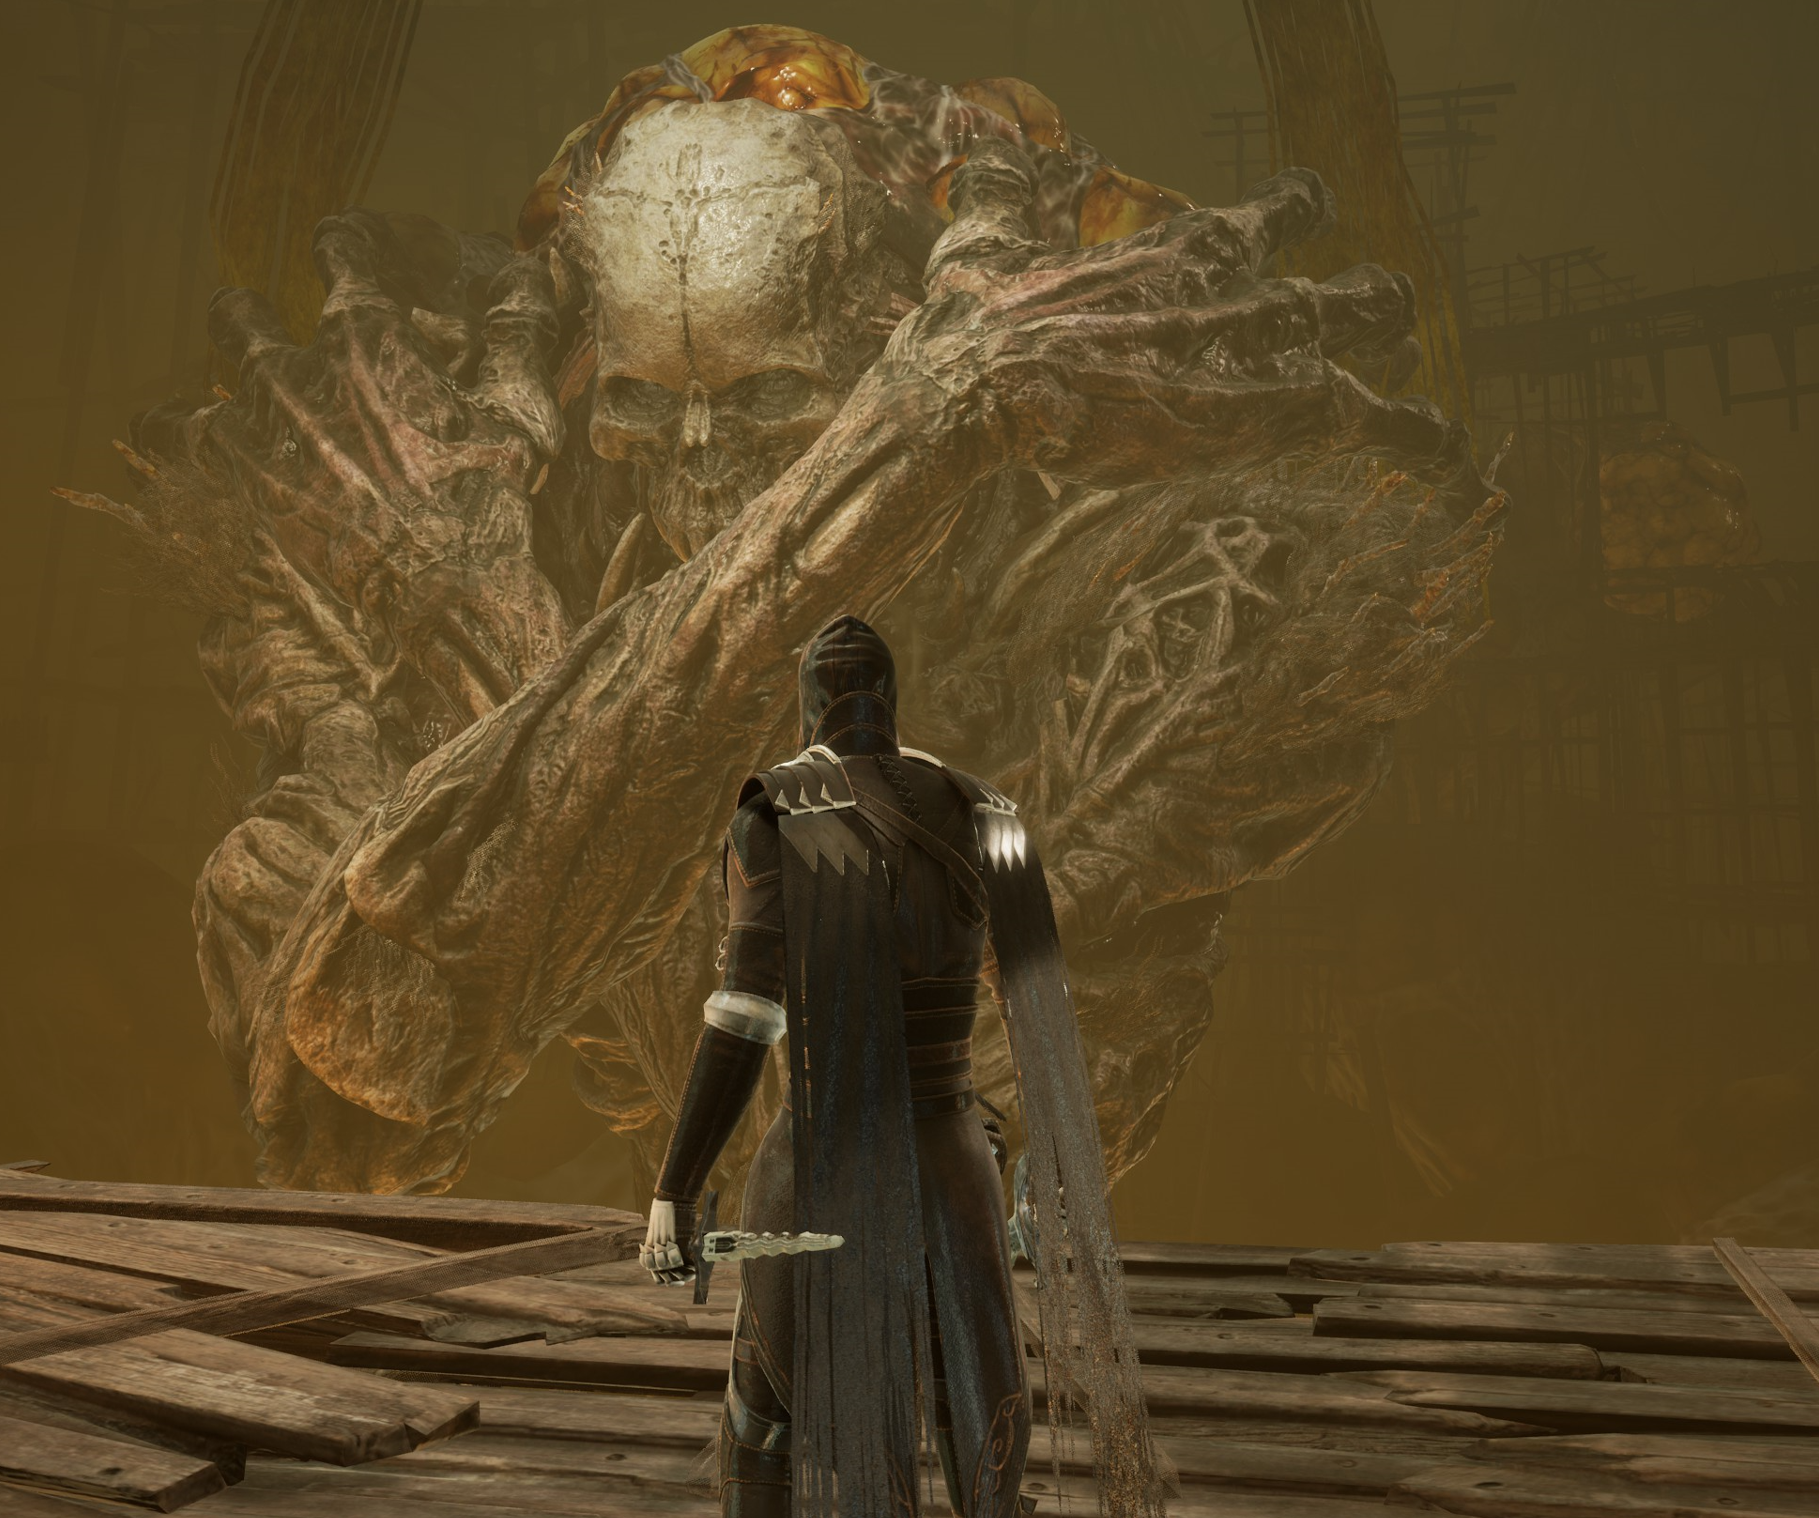 Thymesia brings Bloodborne-style combat to a plagued world